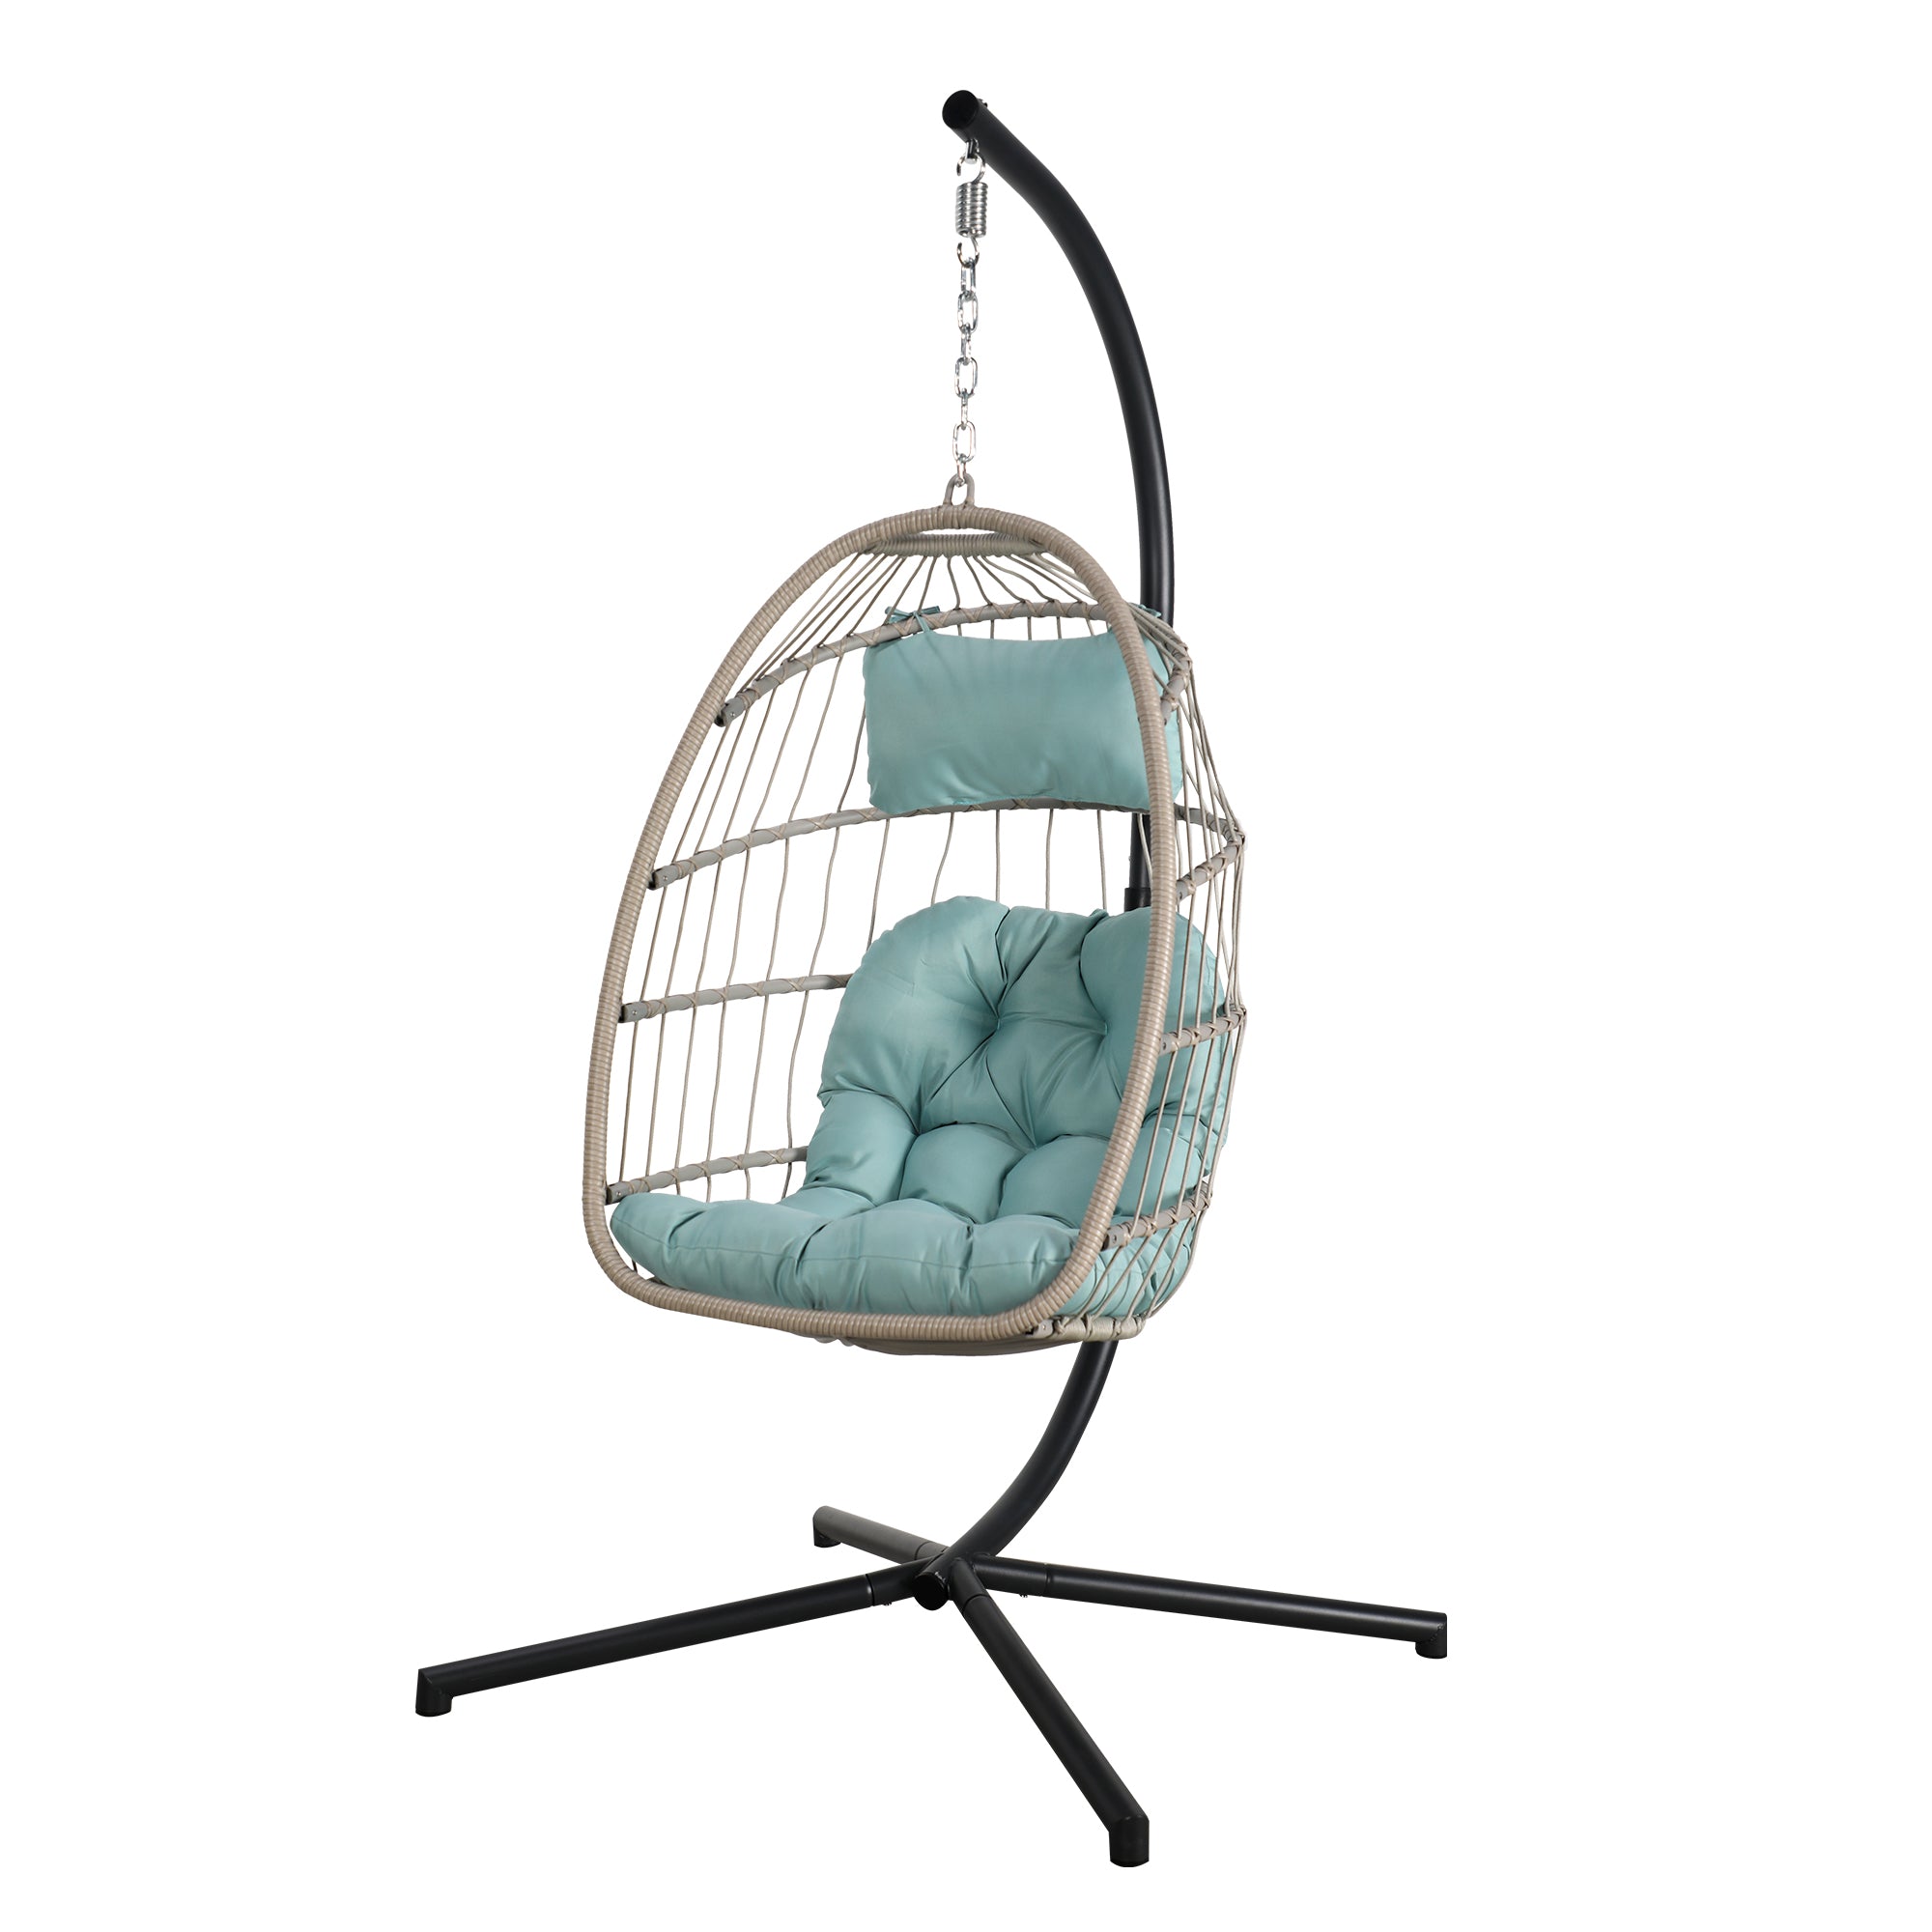 Leura Hanging Egg Chair with Stand, Tiffany Blue